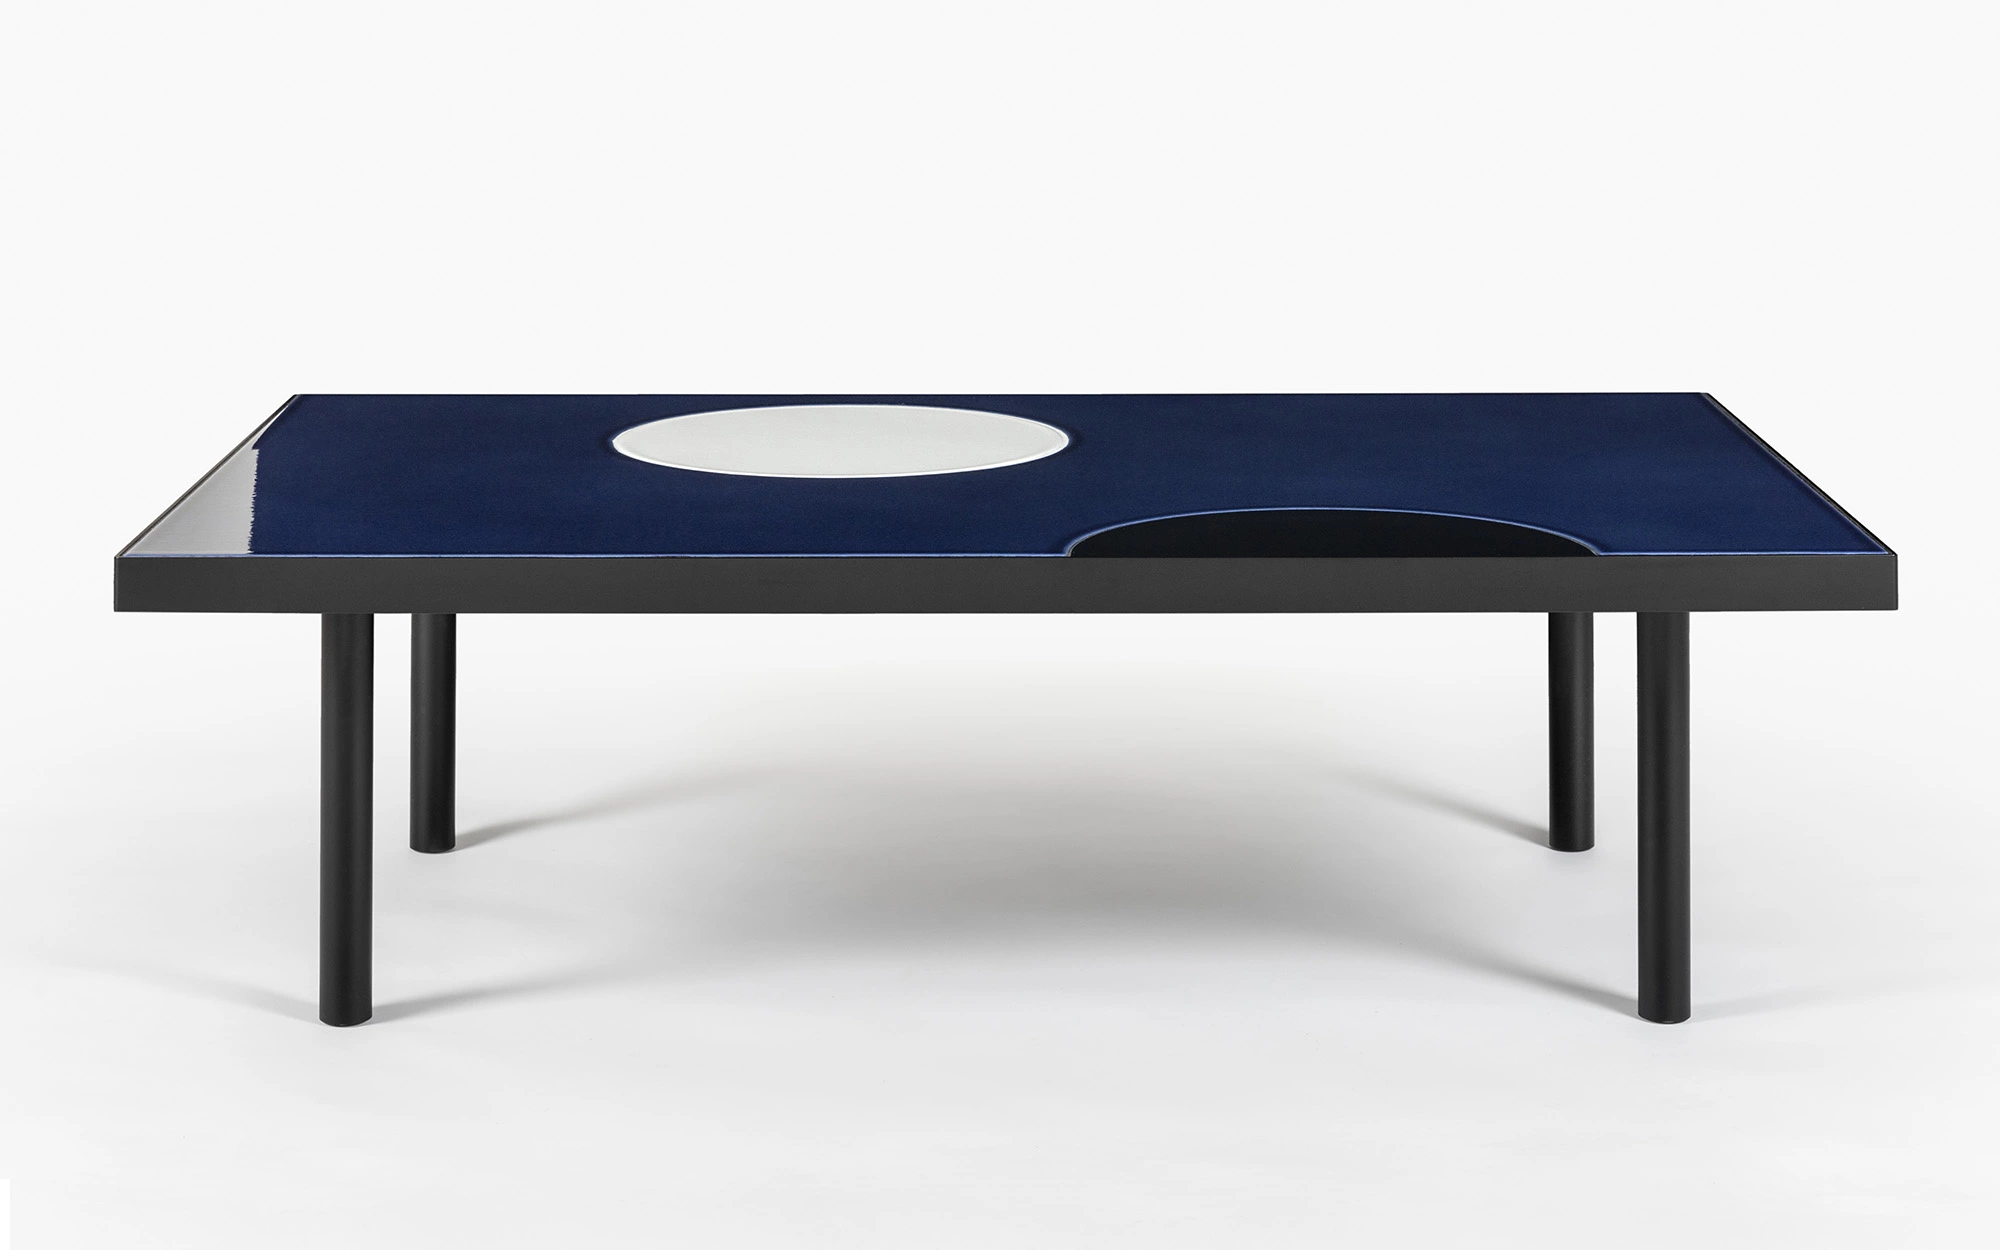 Translation Discolo Coffee Table - Pierre Charpin - Bench - Galerie kreo